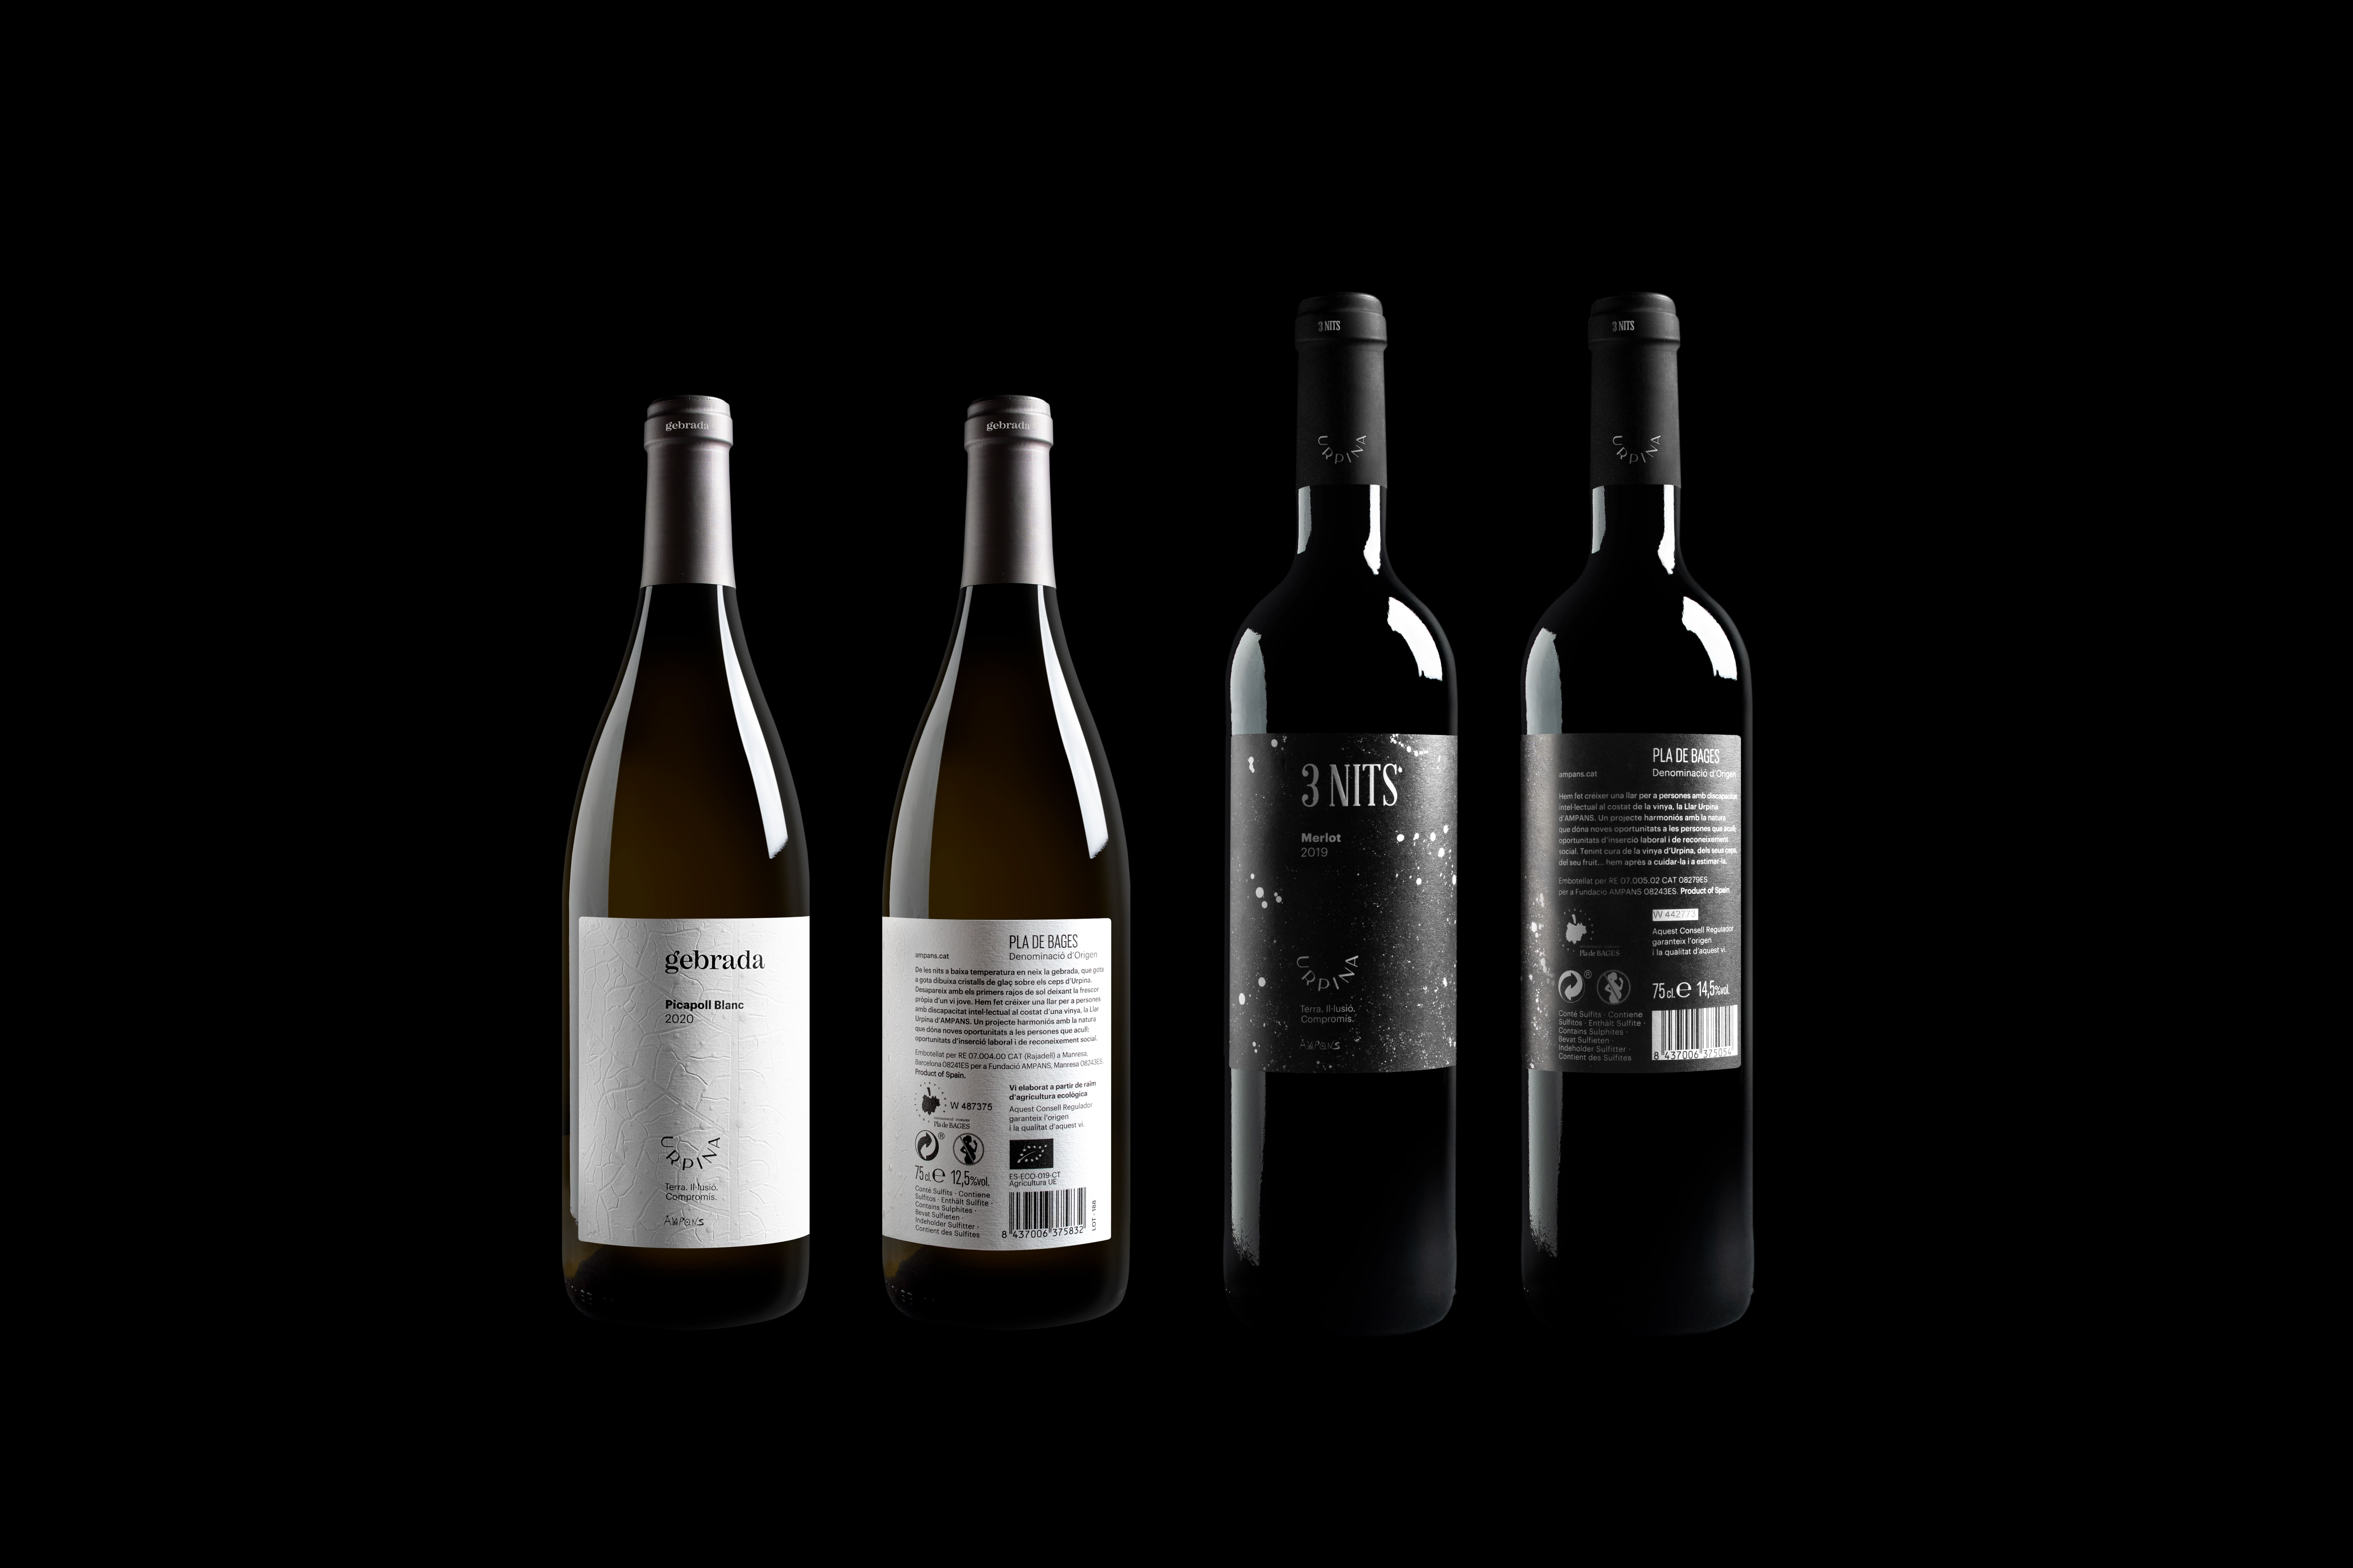 Morillas Create Brand Image and Identity of Two Artisanal Wines